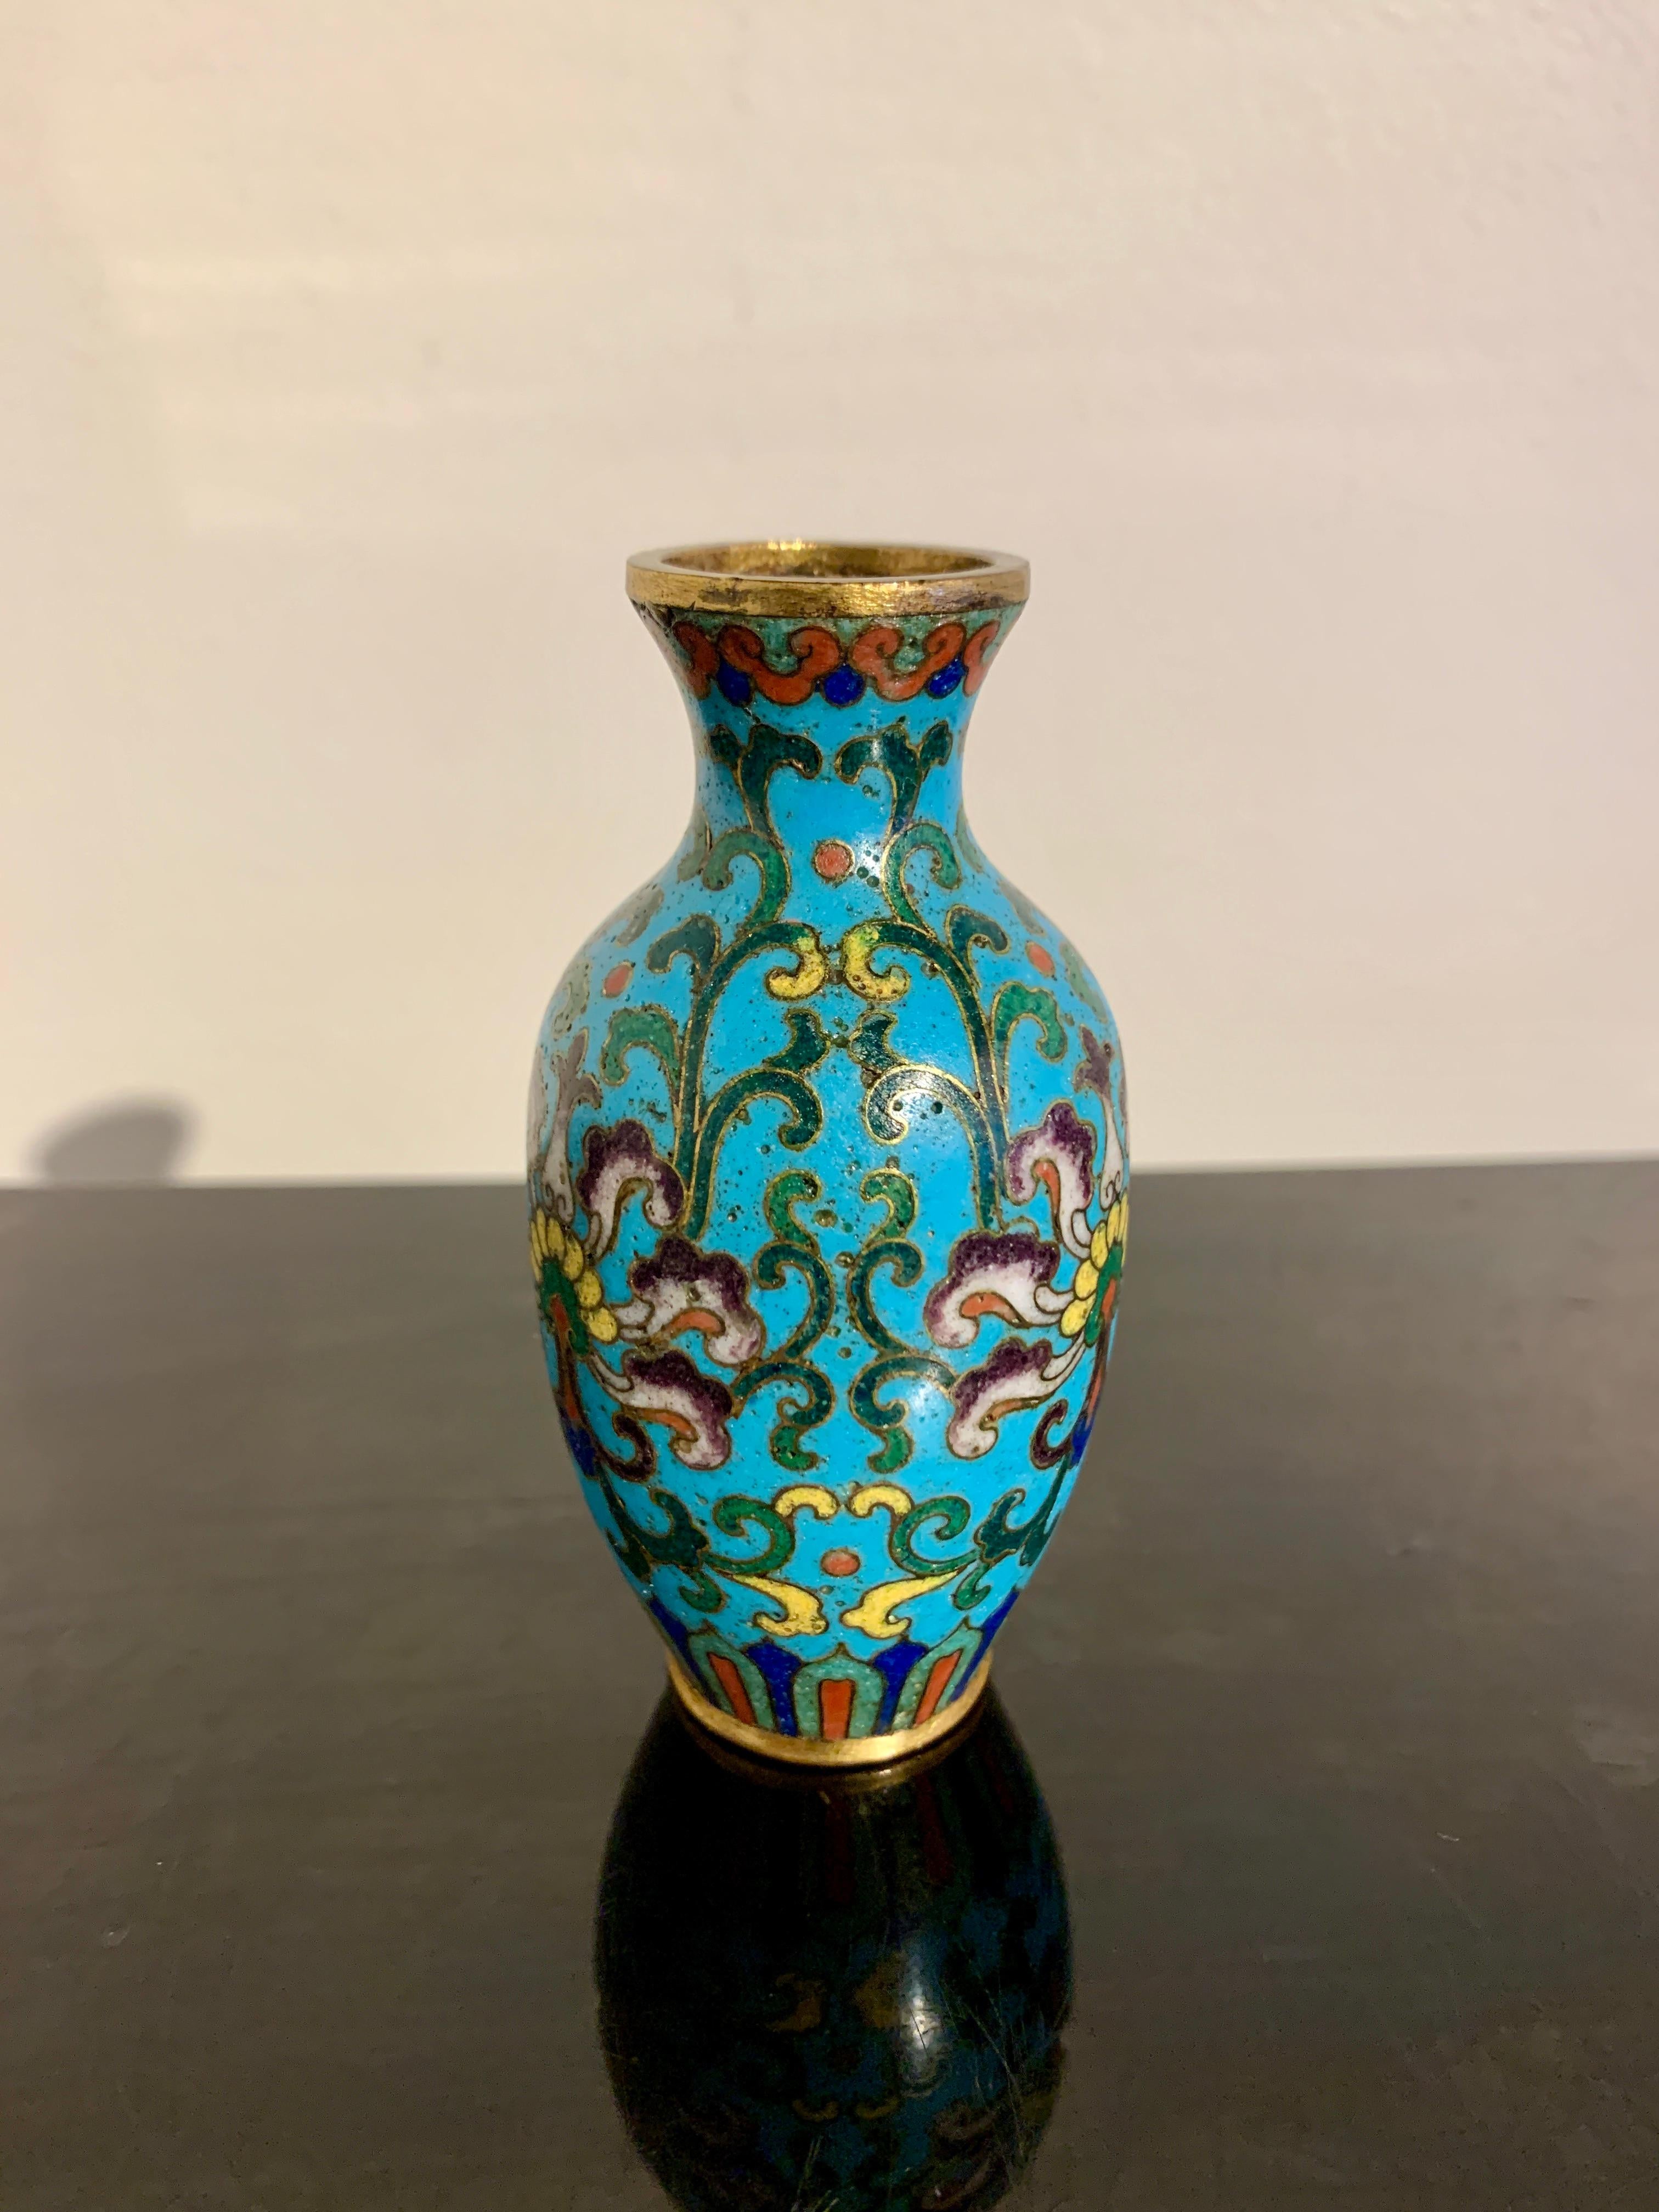 A small and elegant Chinese cloisonné vase for incense tools, Qing Dynasty, 18th/19th century, China.

Made for the scholar's studio, this small refined vase, was used to hold incense tools, including a small pair of tongs or chopsticks and spoon.